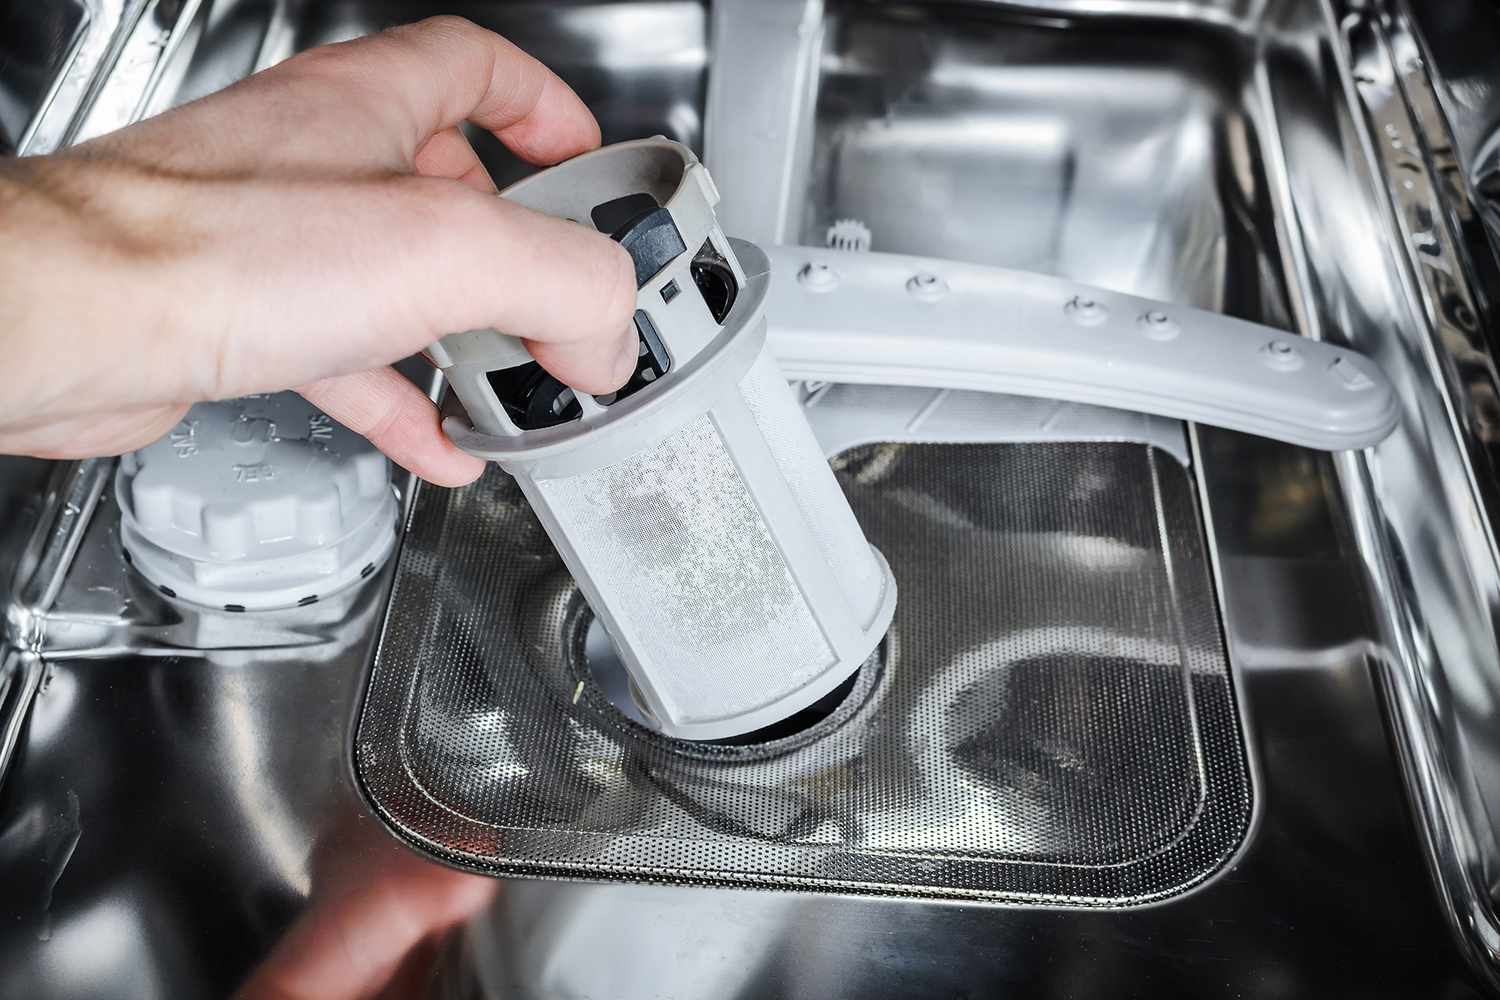 How to Clean a Dishwasher Filter So Your Plates and Glasses